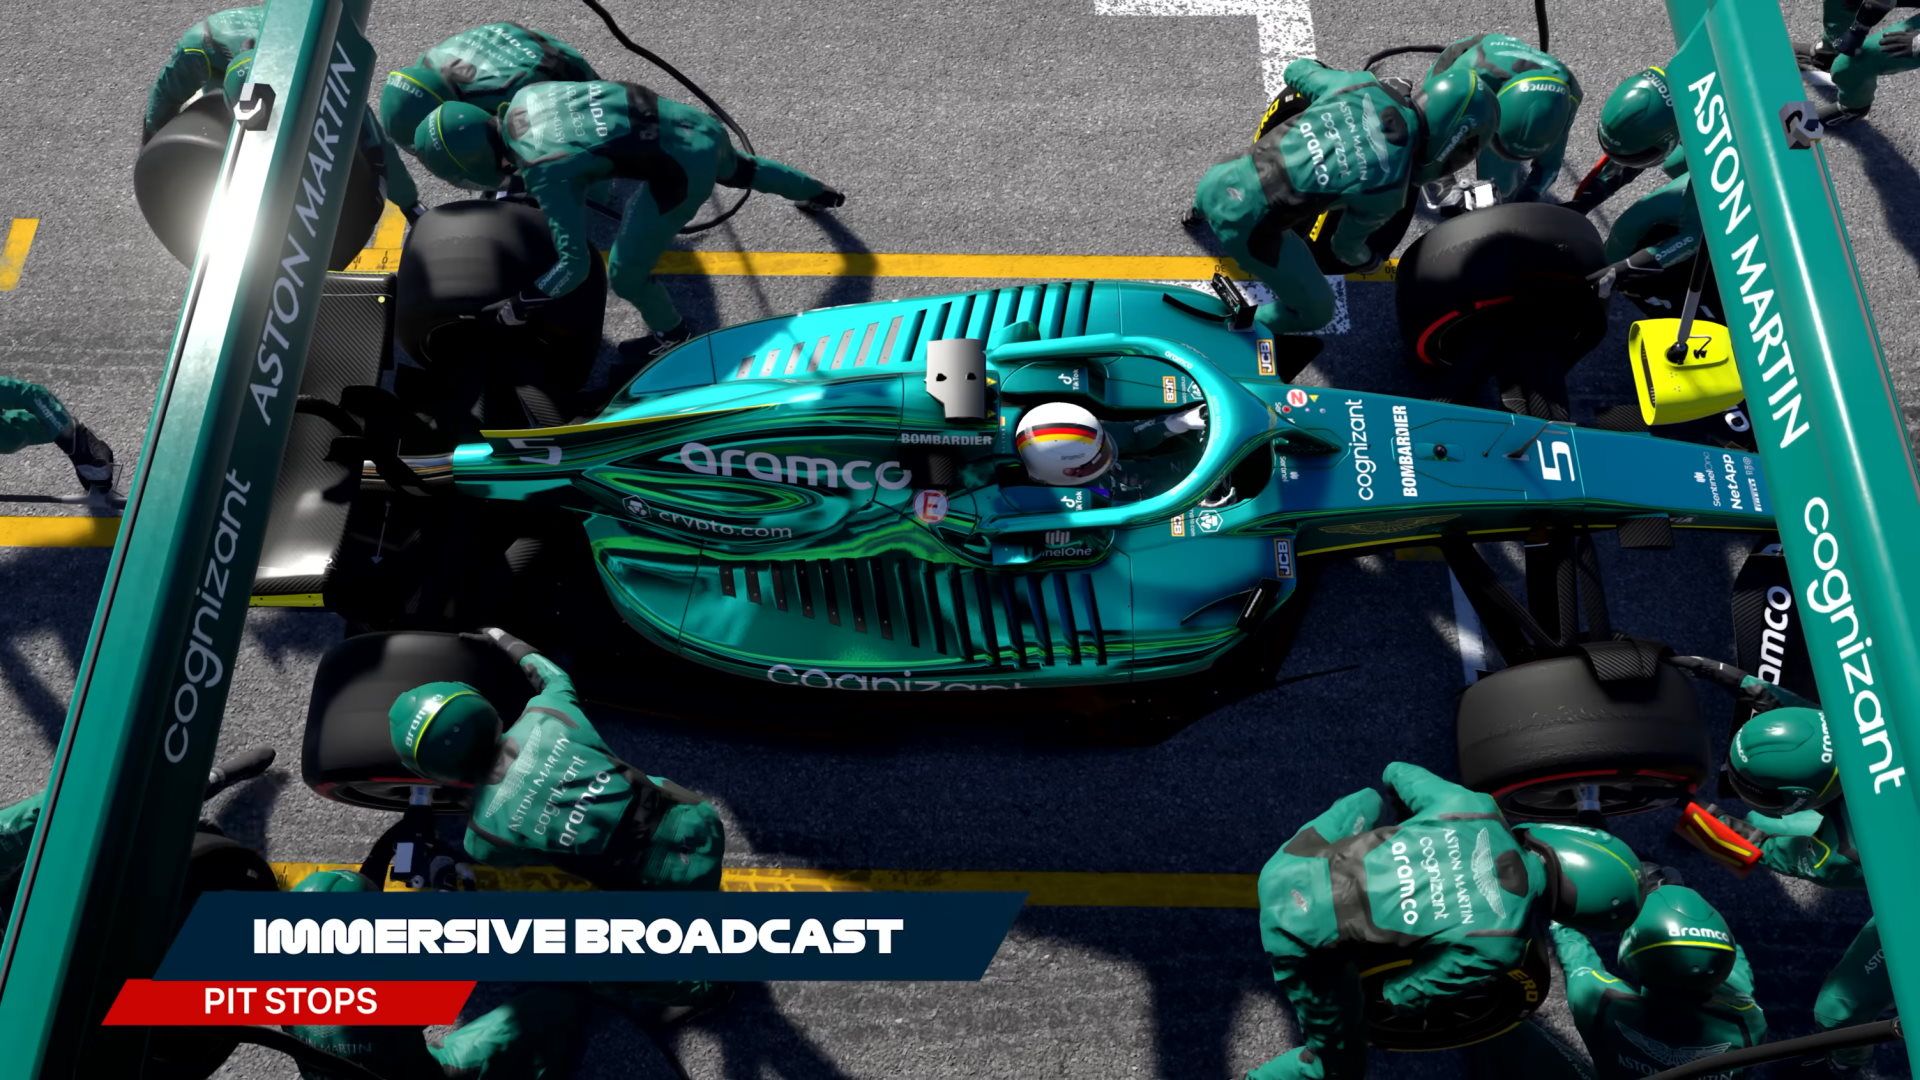 Broadcast Style Bird View Pit Stop in Codemasters F1 22 Game.